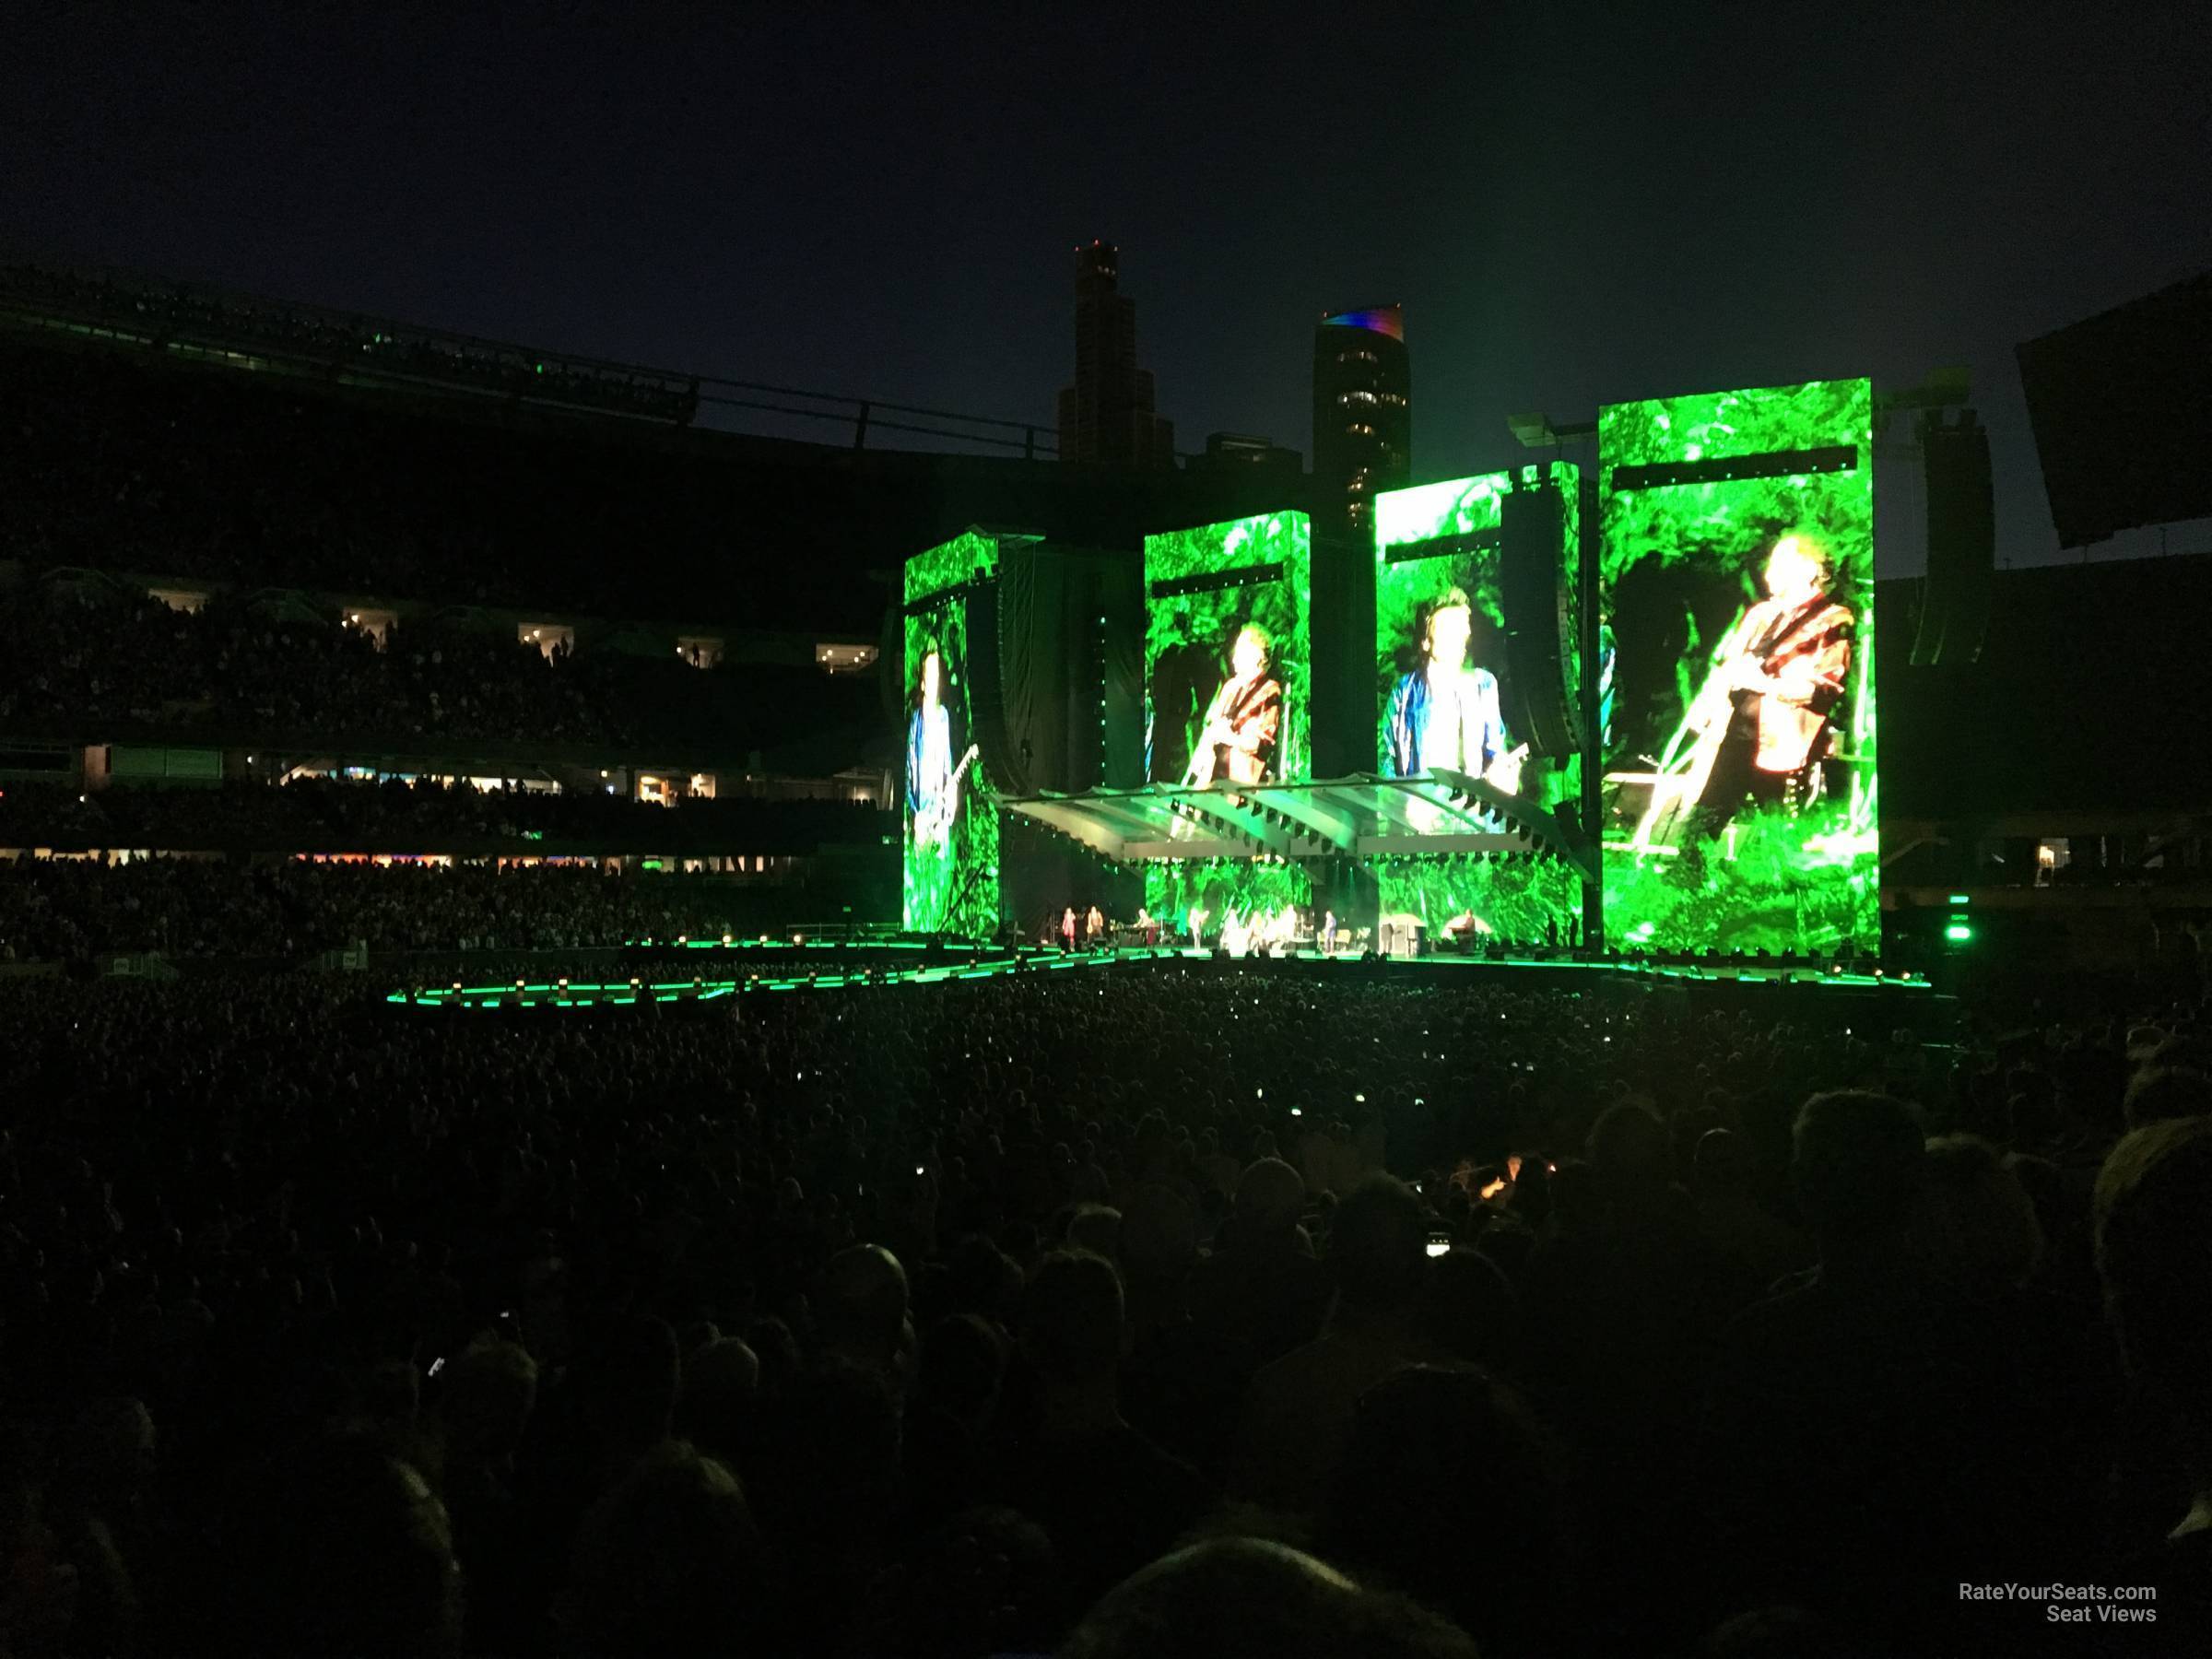 section 110, row 8 seat view  for concert - soldier field